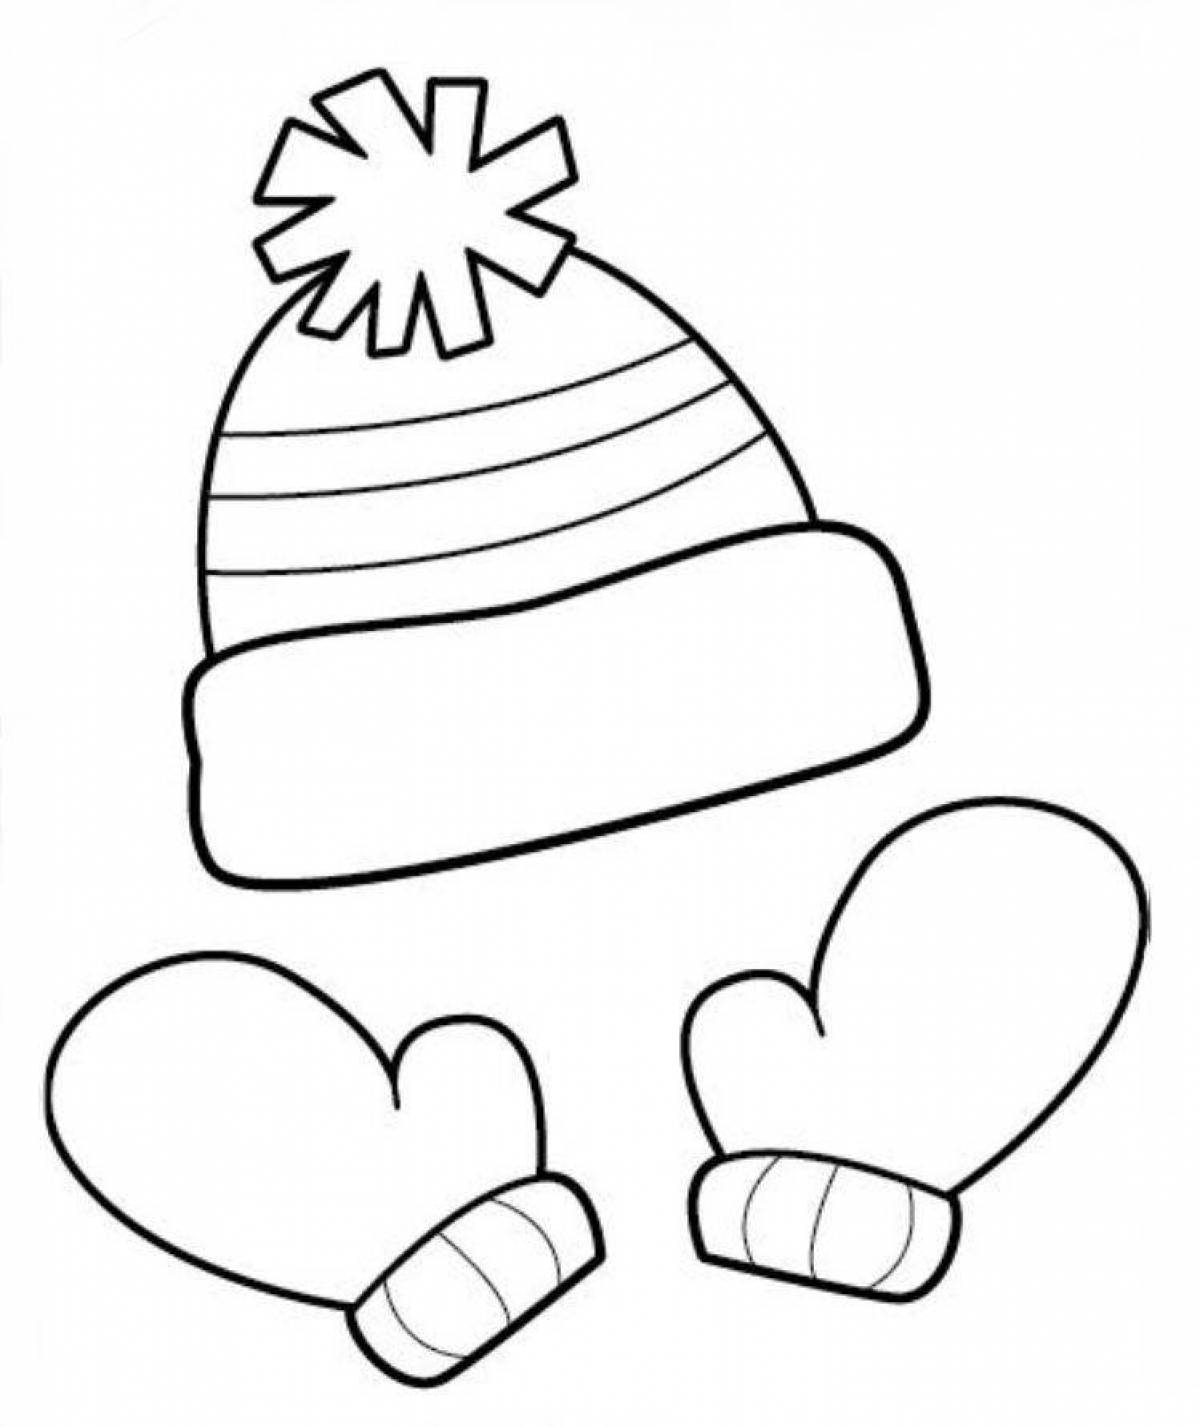 Luminous hat and scarf coloring book for babies